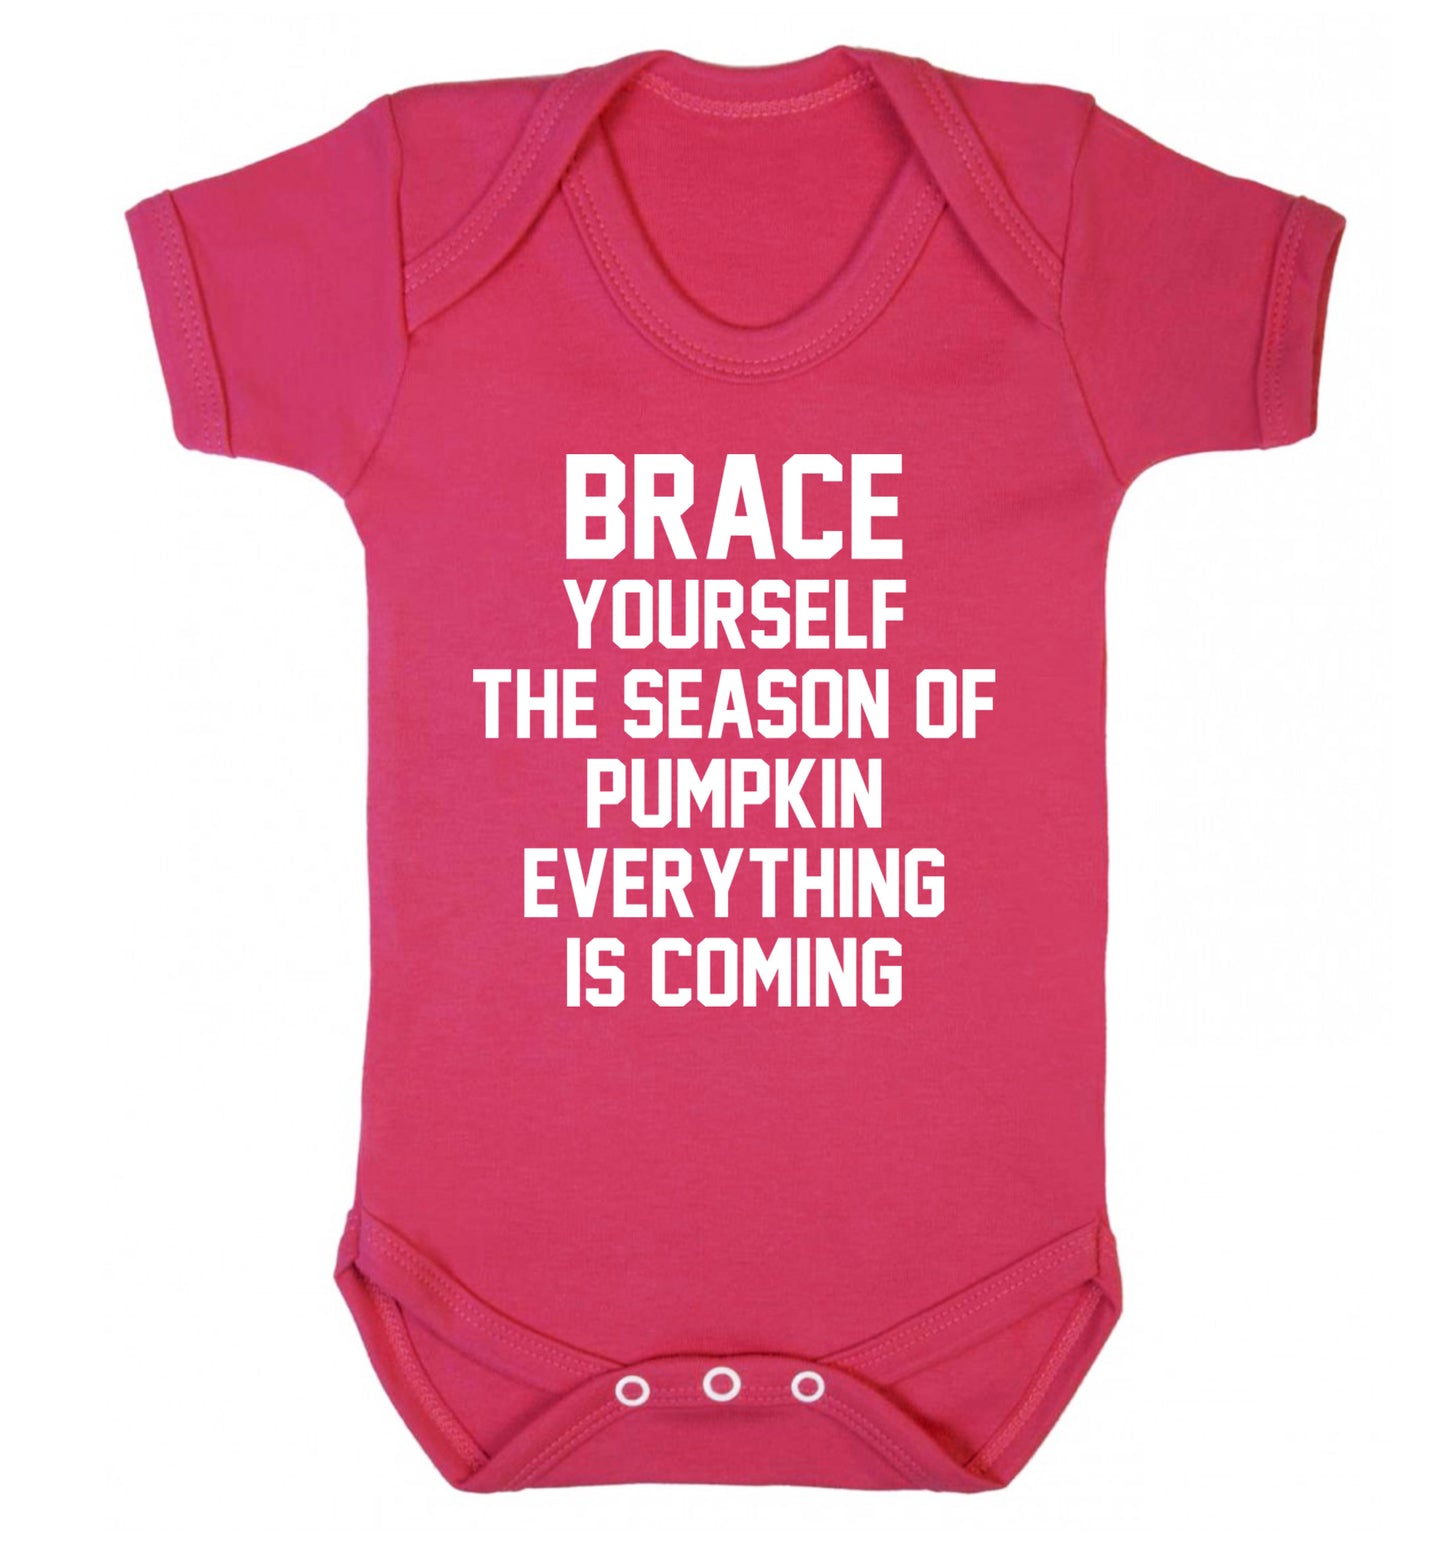 Brace yourself the season of pumpkin everything is coming Baby Vest dark pink 18-24 months